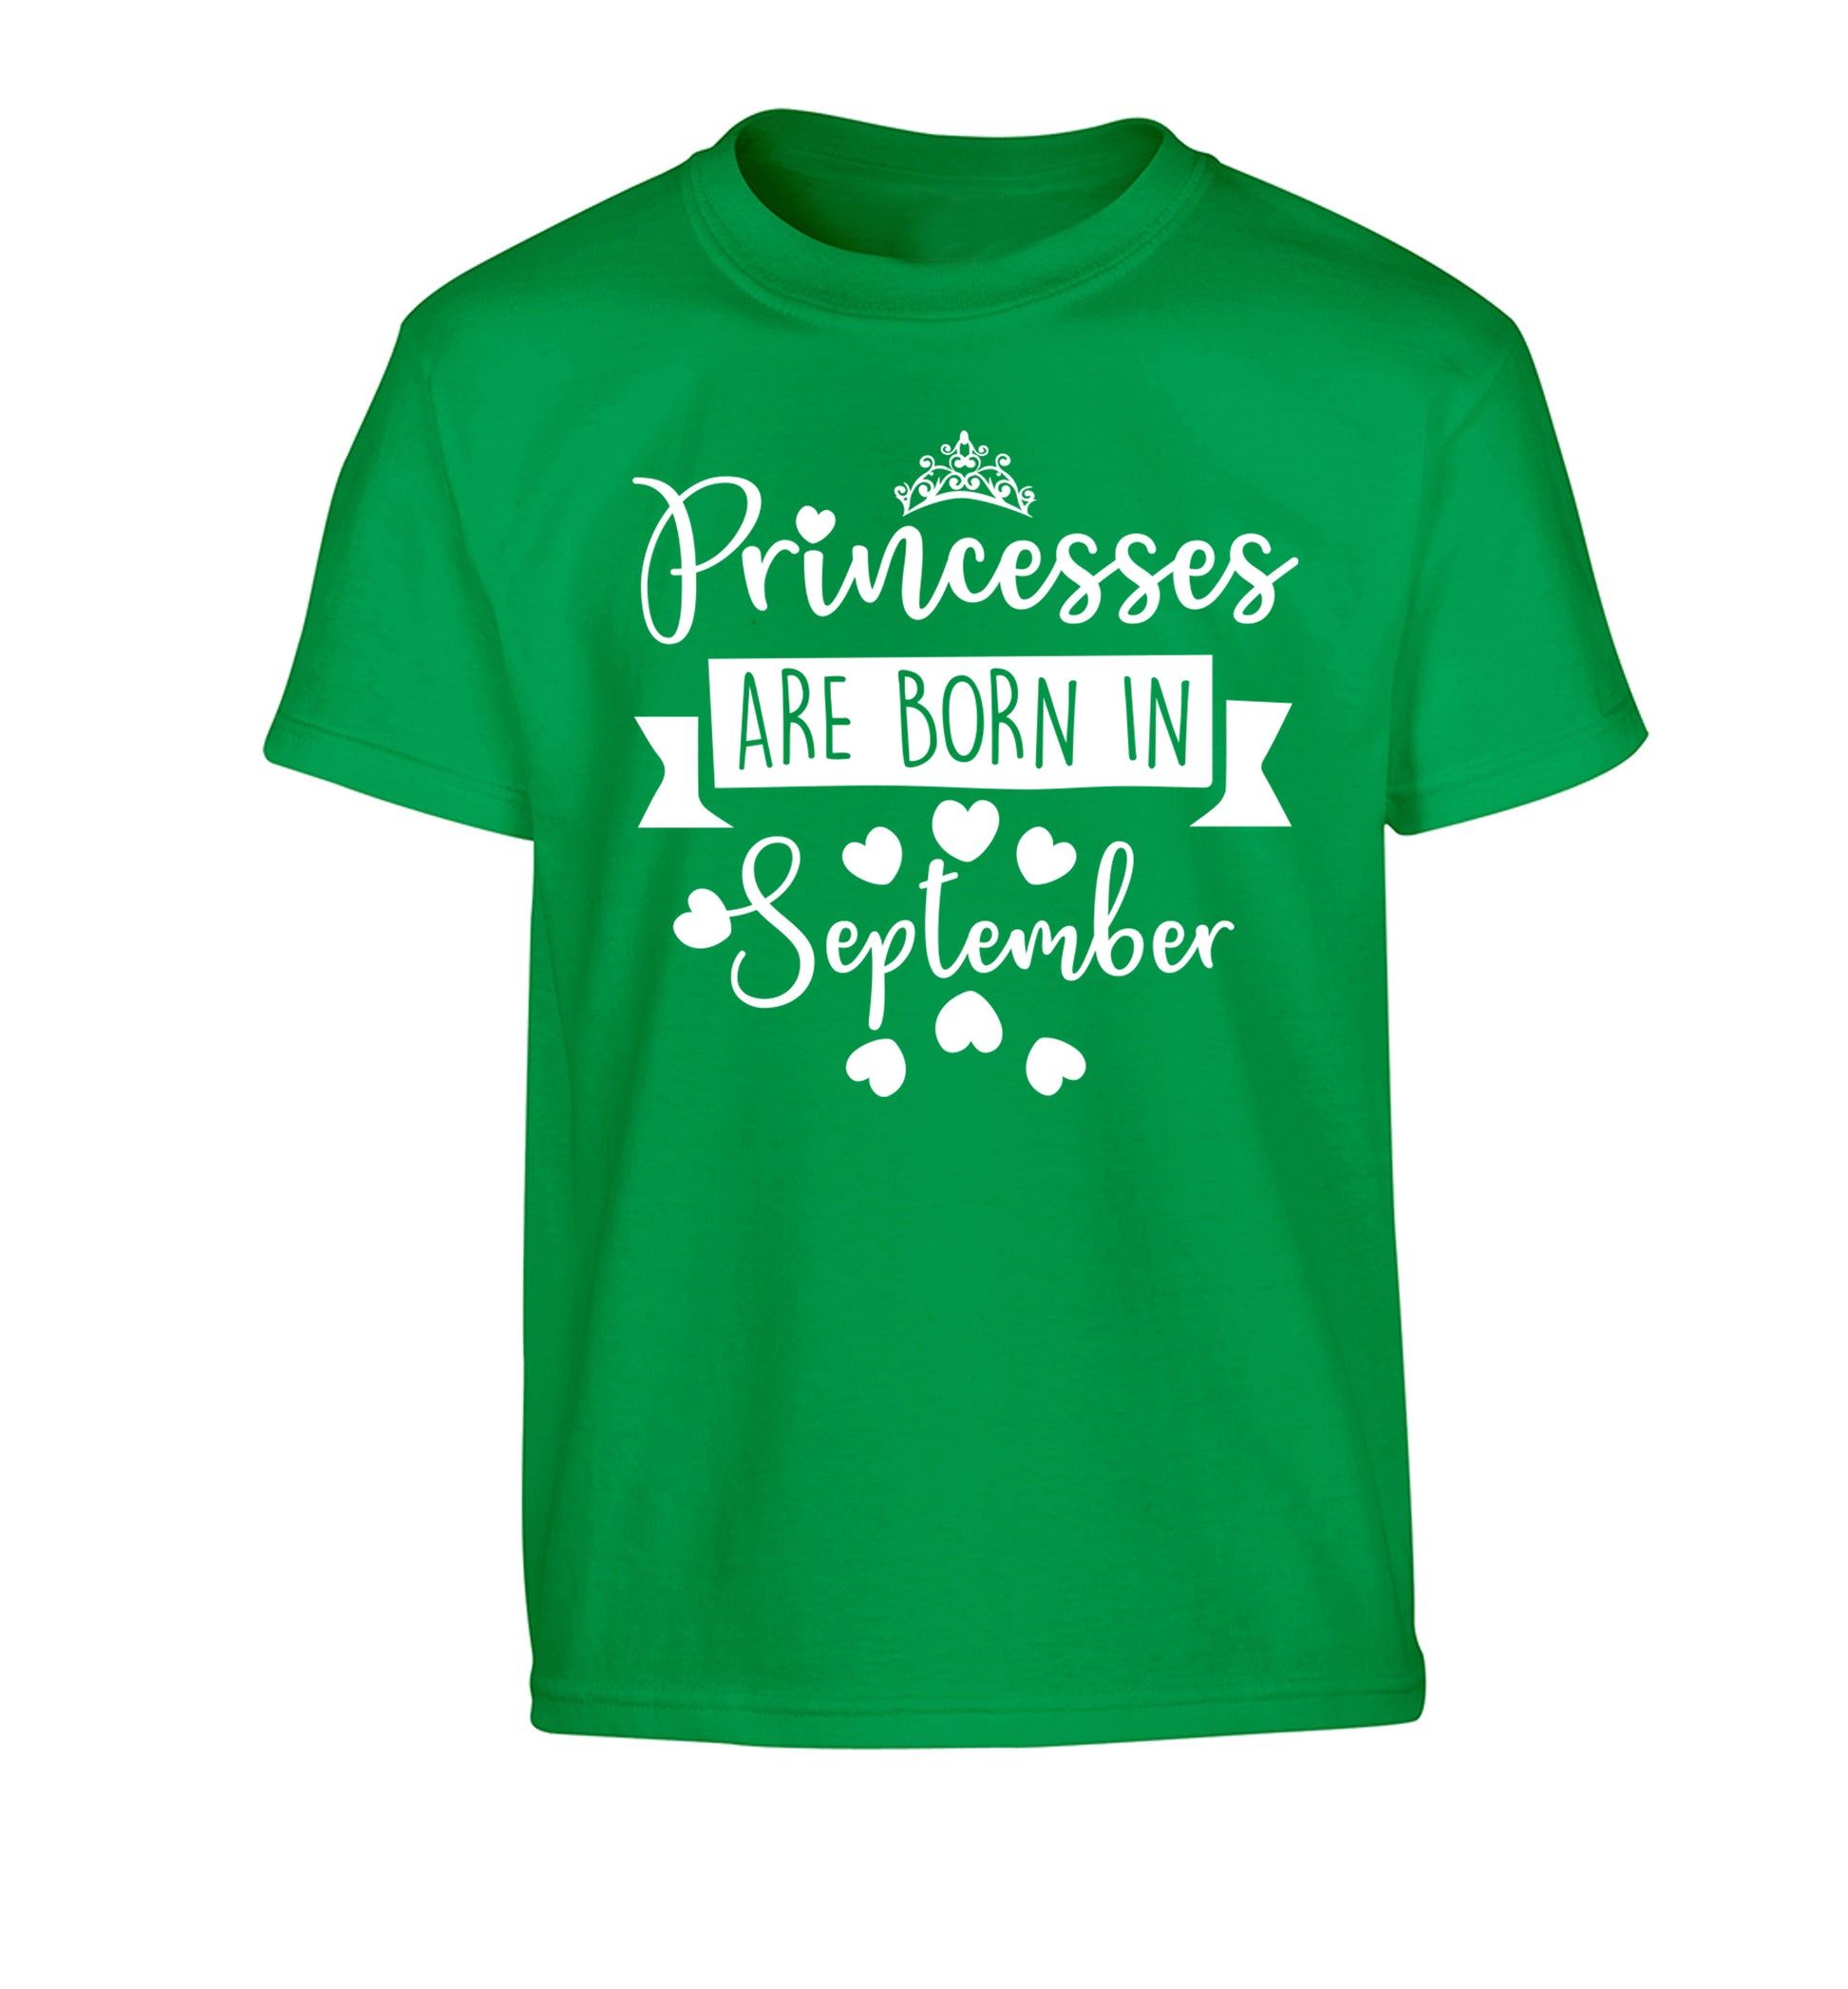 Princesses are born in September Children's green Tshirt 12-13 Years